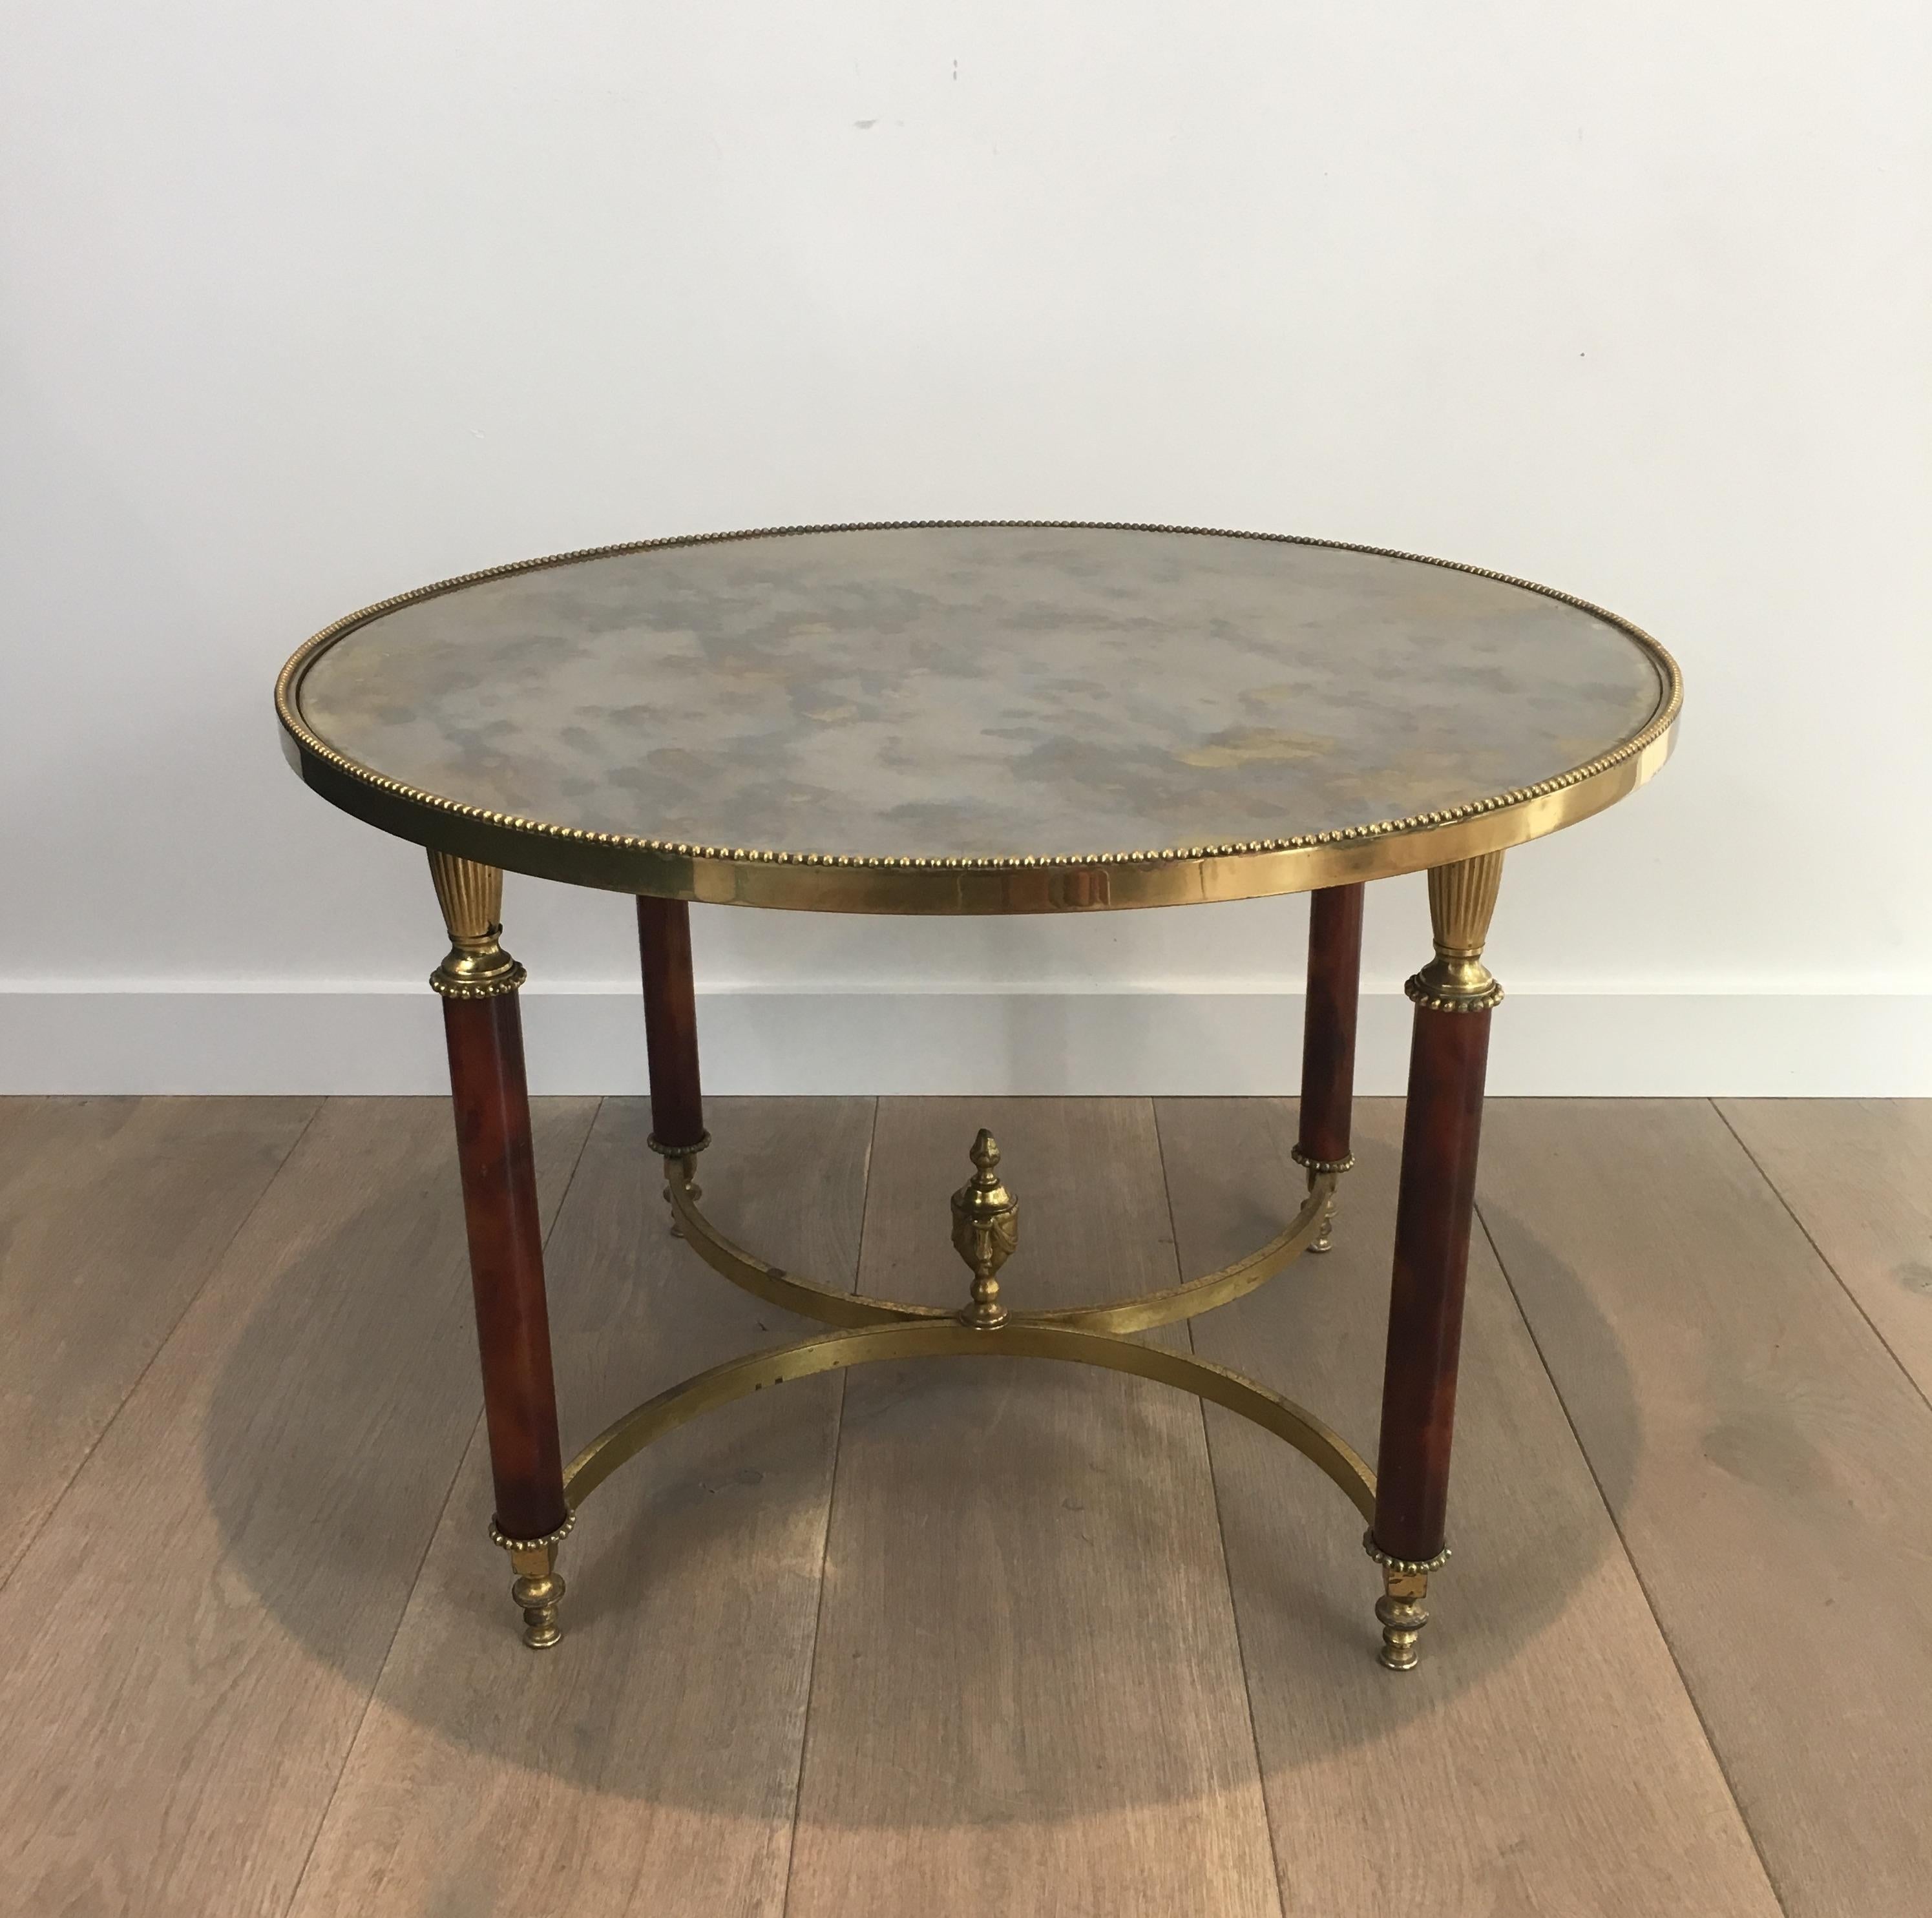 Attributed to Maison Jansen. Round Neoclassical coffee table, side table or end table made of rare red Lucite legs, brass and eglomised mirror top. French, circa 1940.